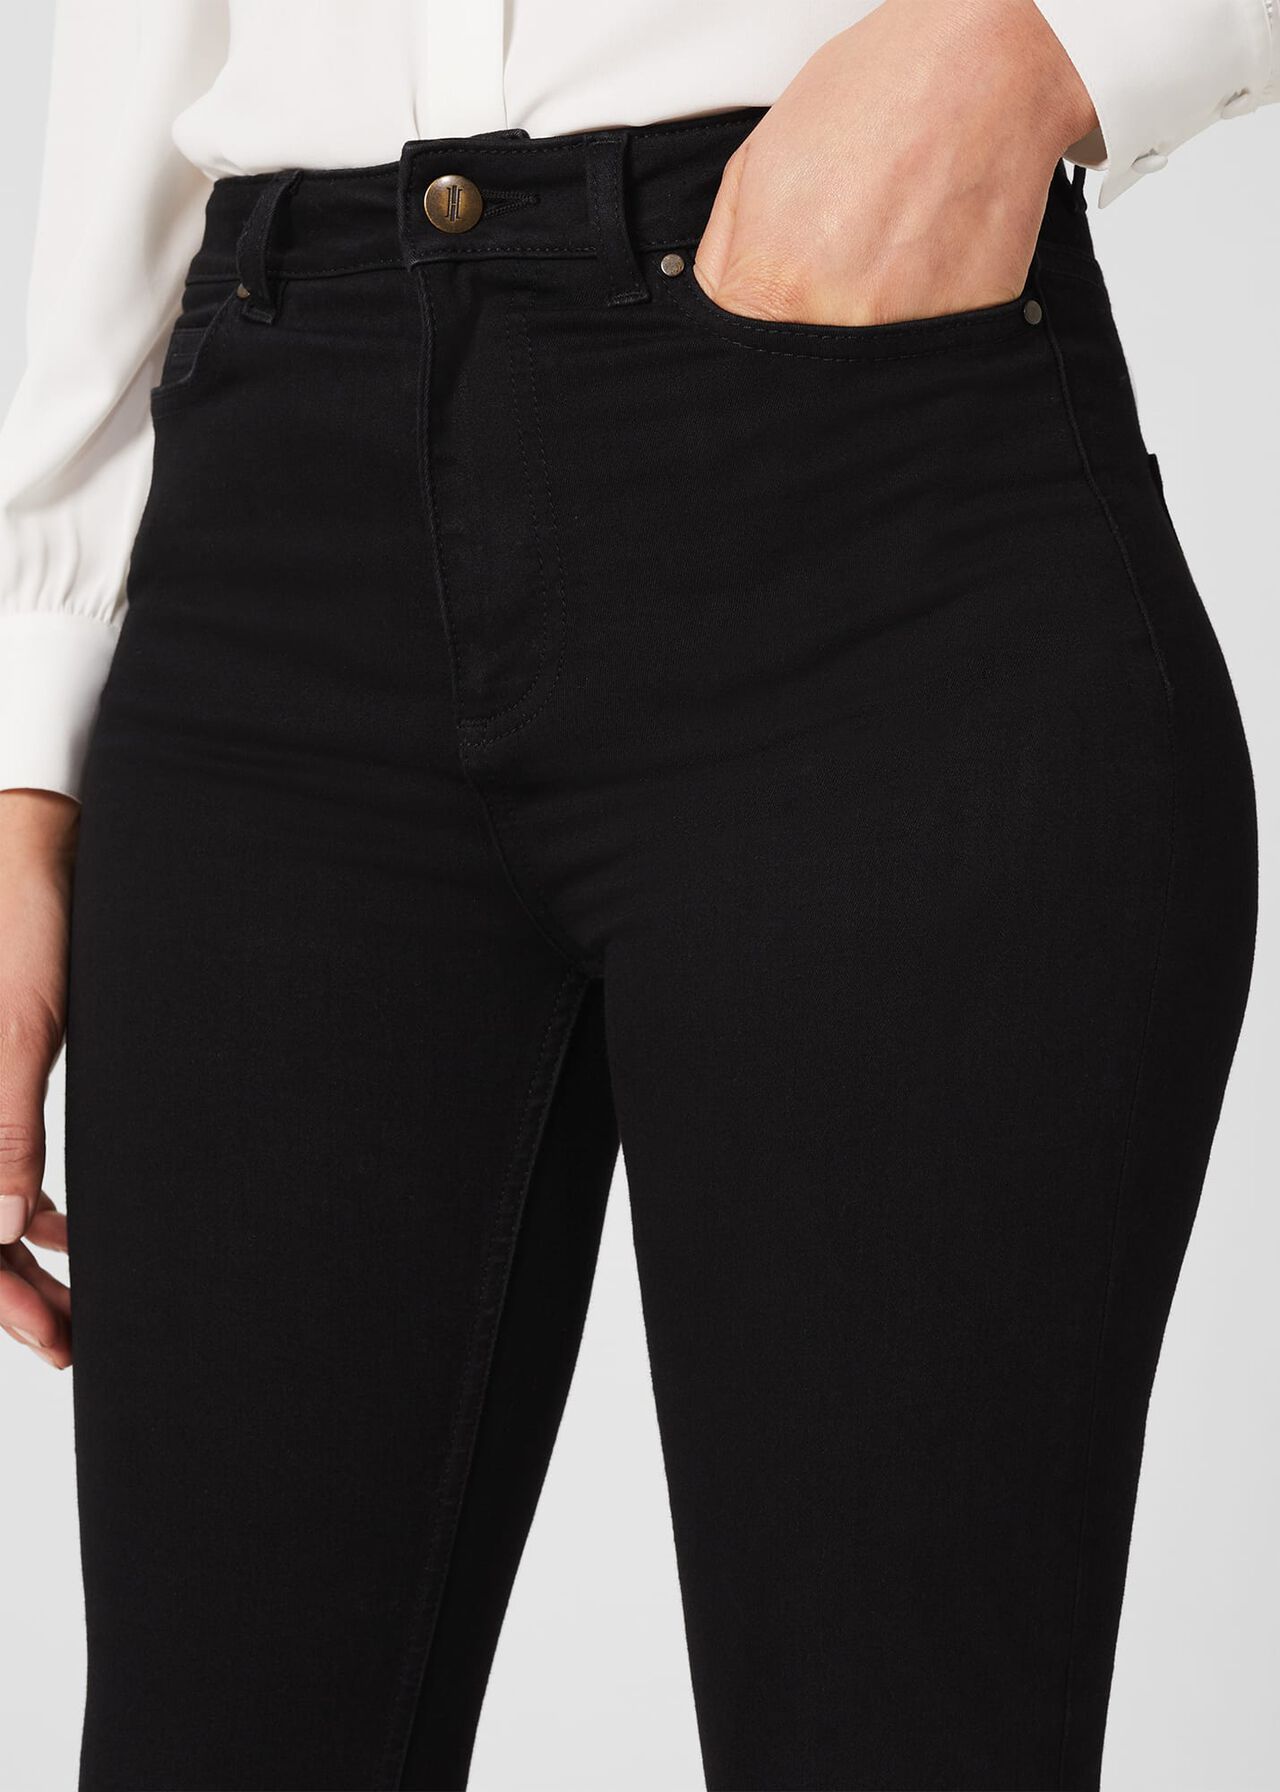 Gia Sculpting Jean With Stretch, Black, hi-res